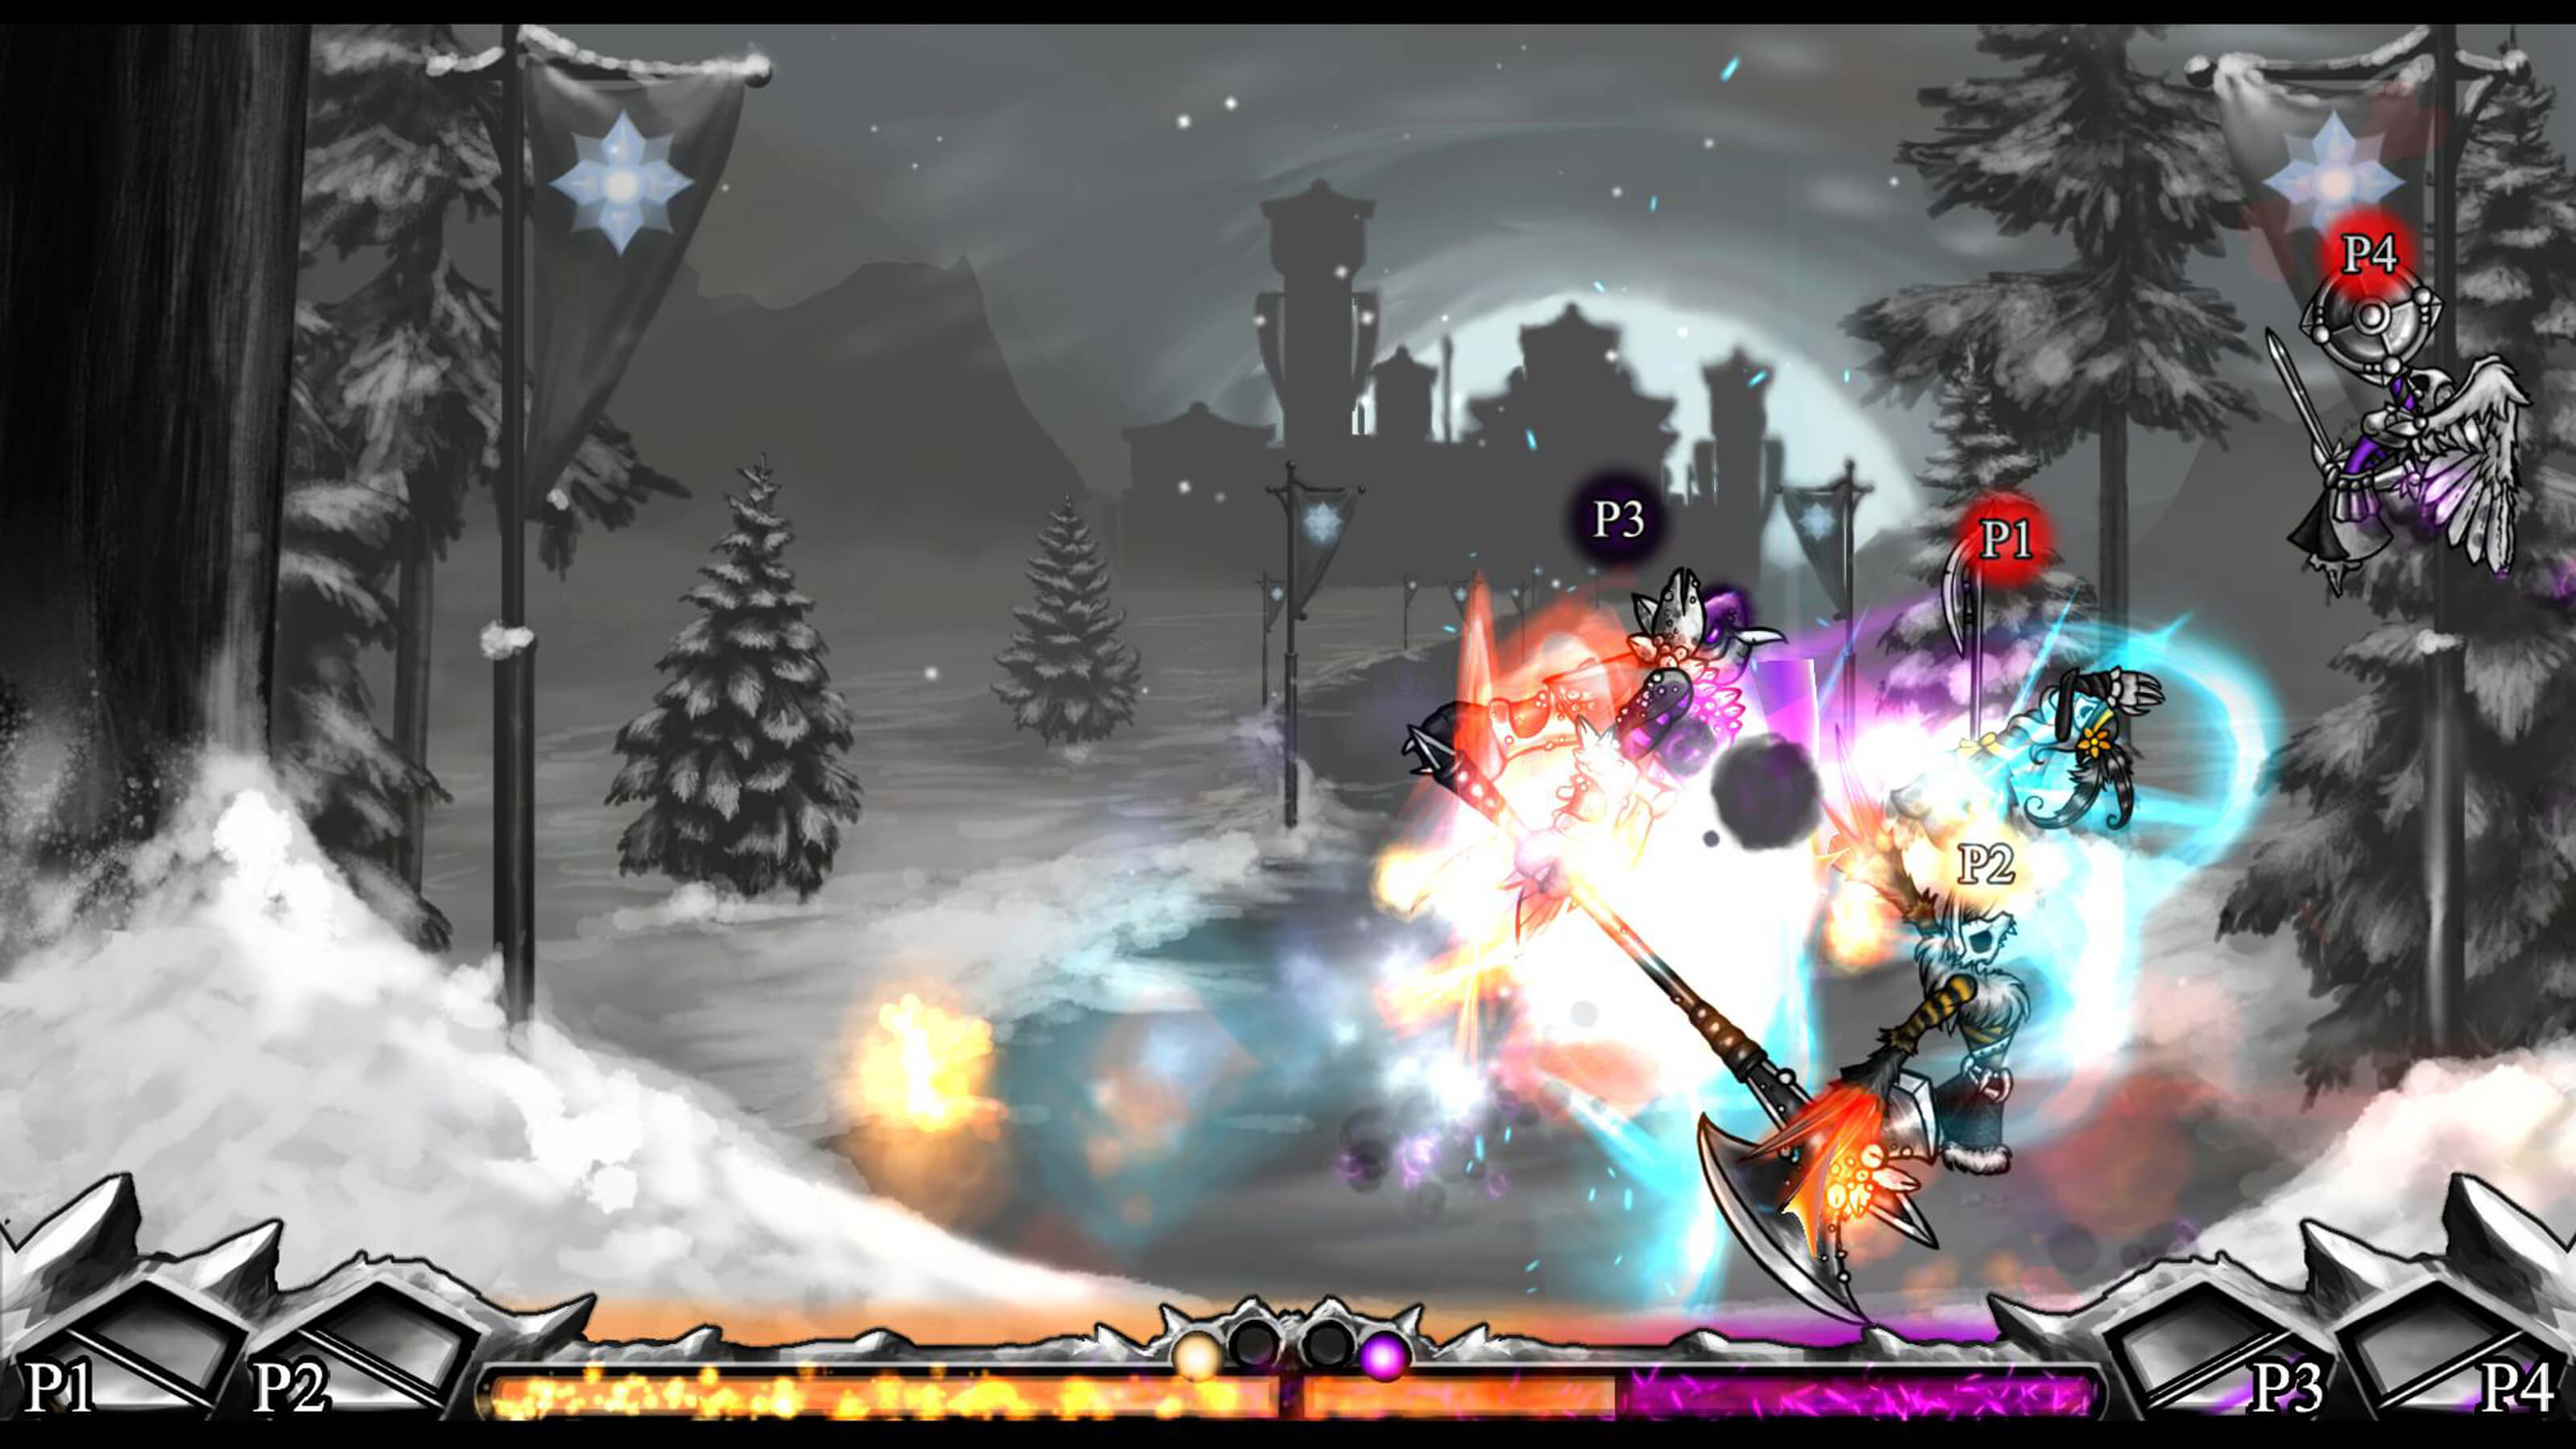 An axe-wielding fighter attacks two players at once in a snowy landscape.